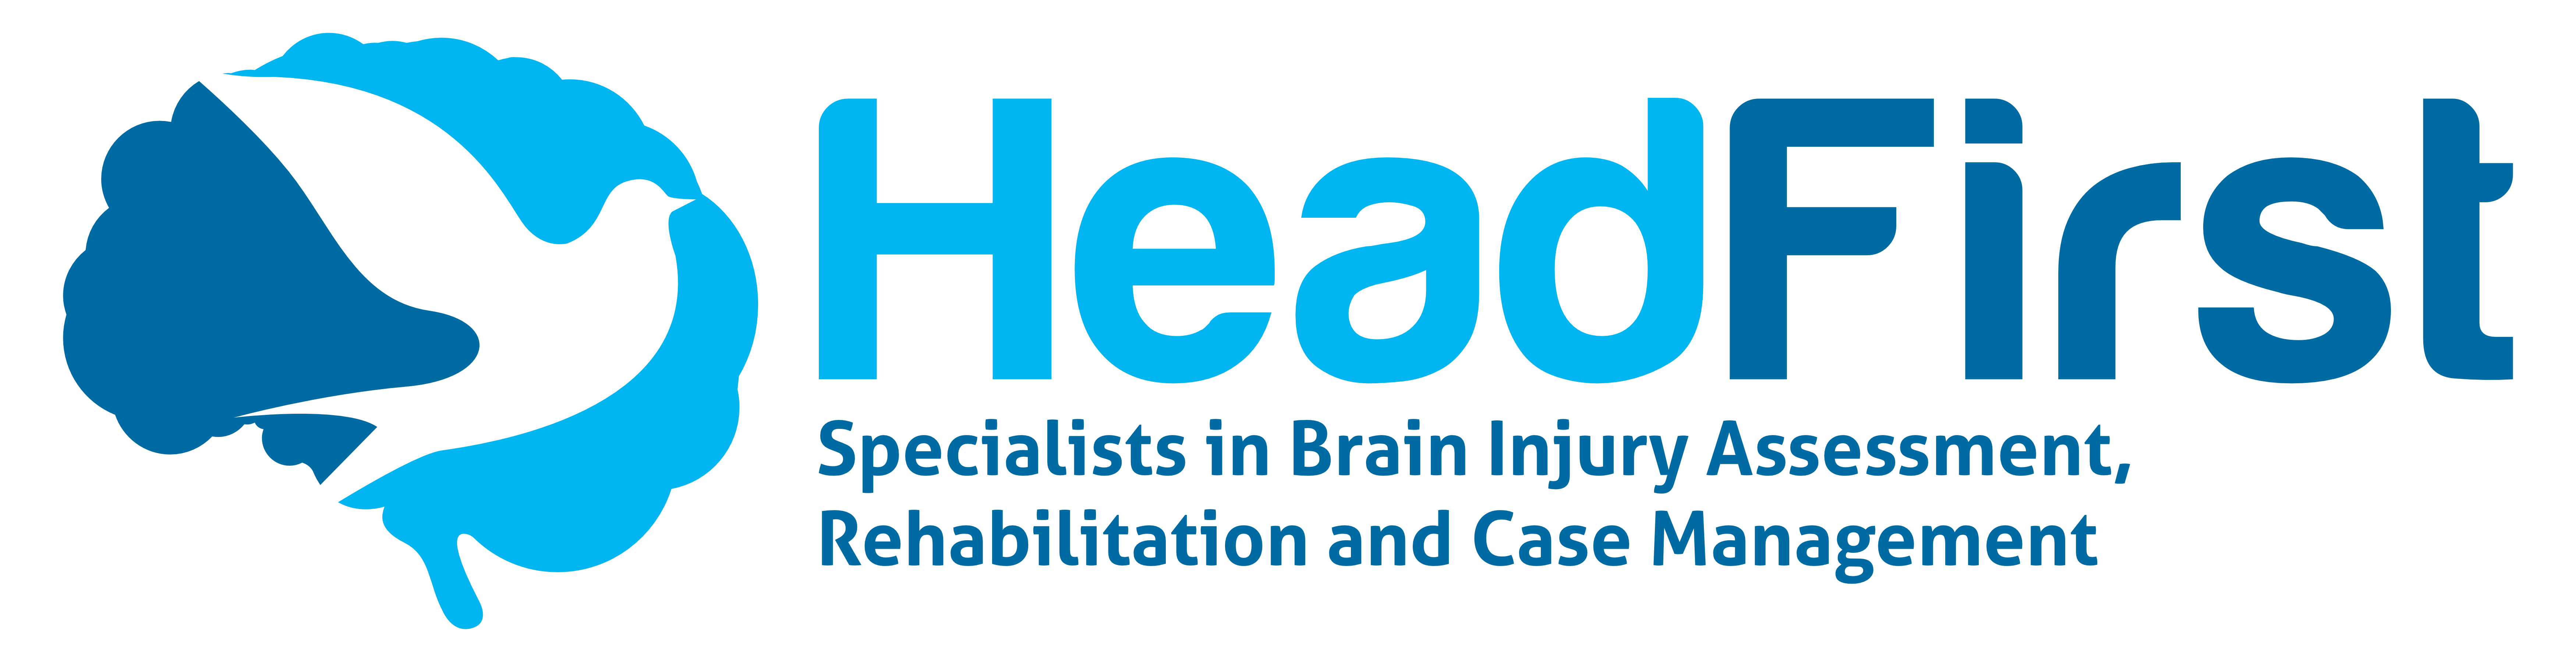 Head First, Specialists in Brain Injury Assessment, Rehabilitation and Case Management